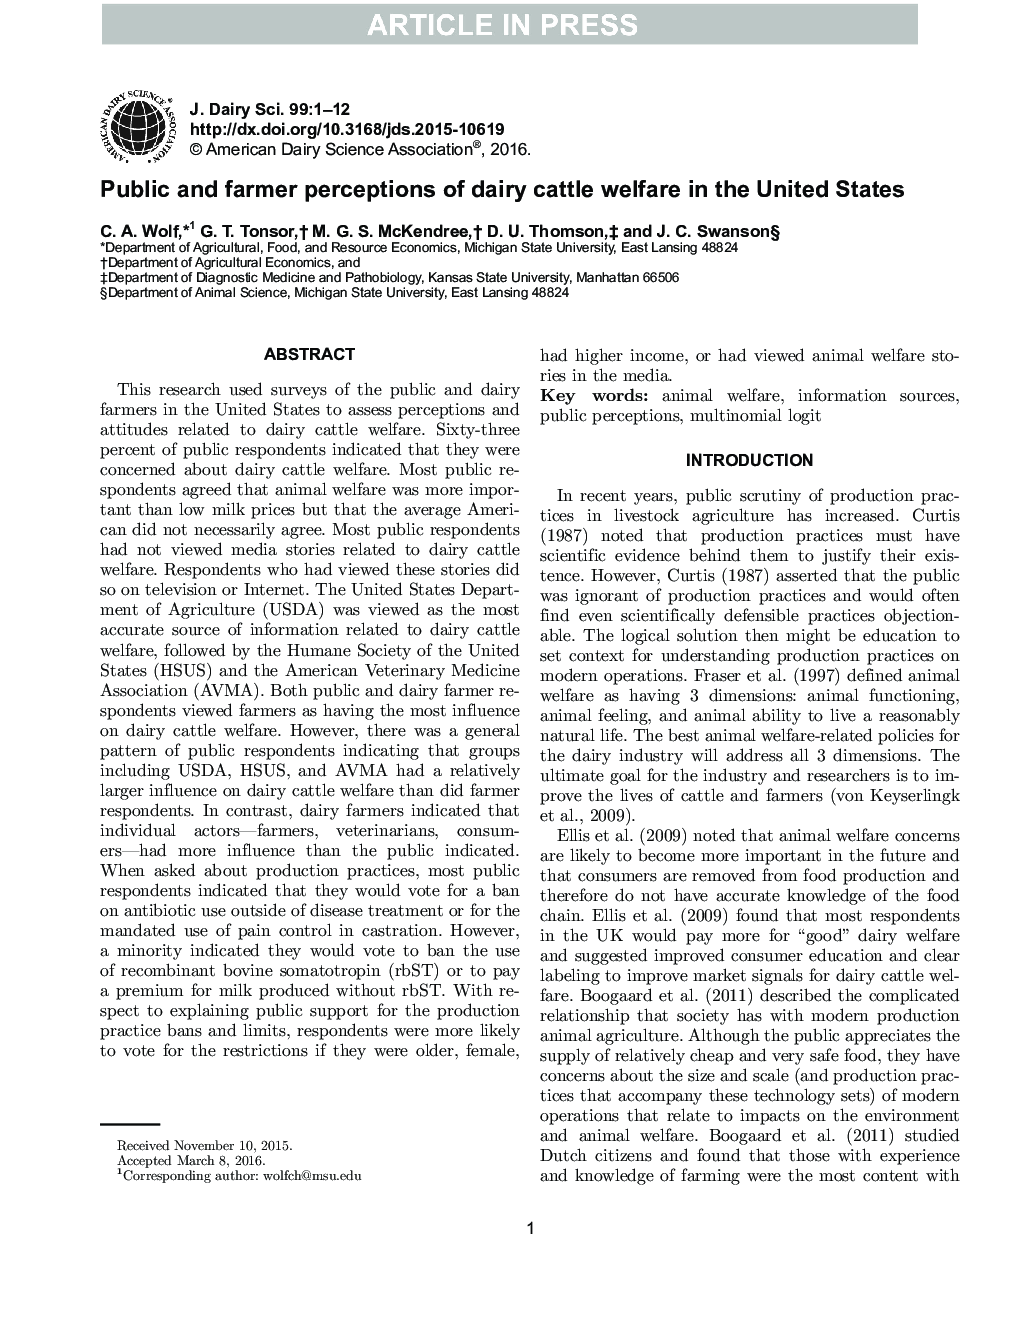 Public and farmer perceptions of dairy cattle welfare in the United States